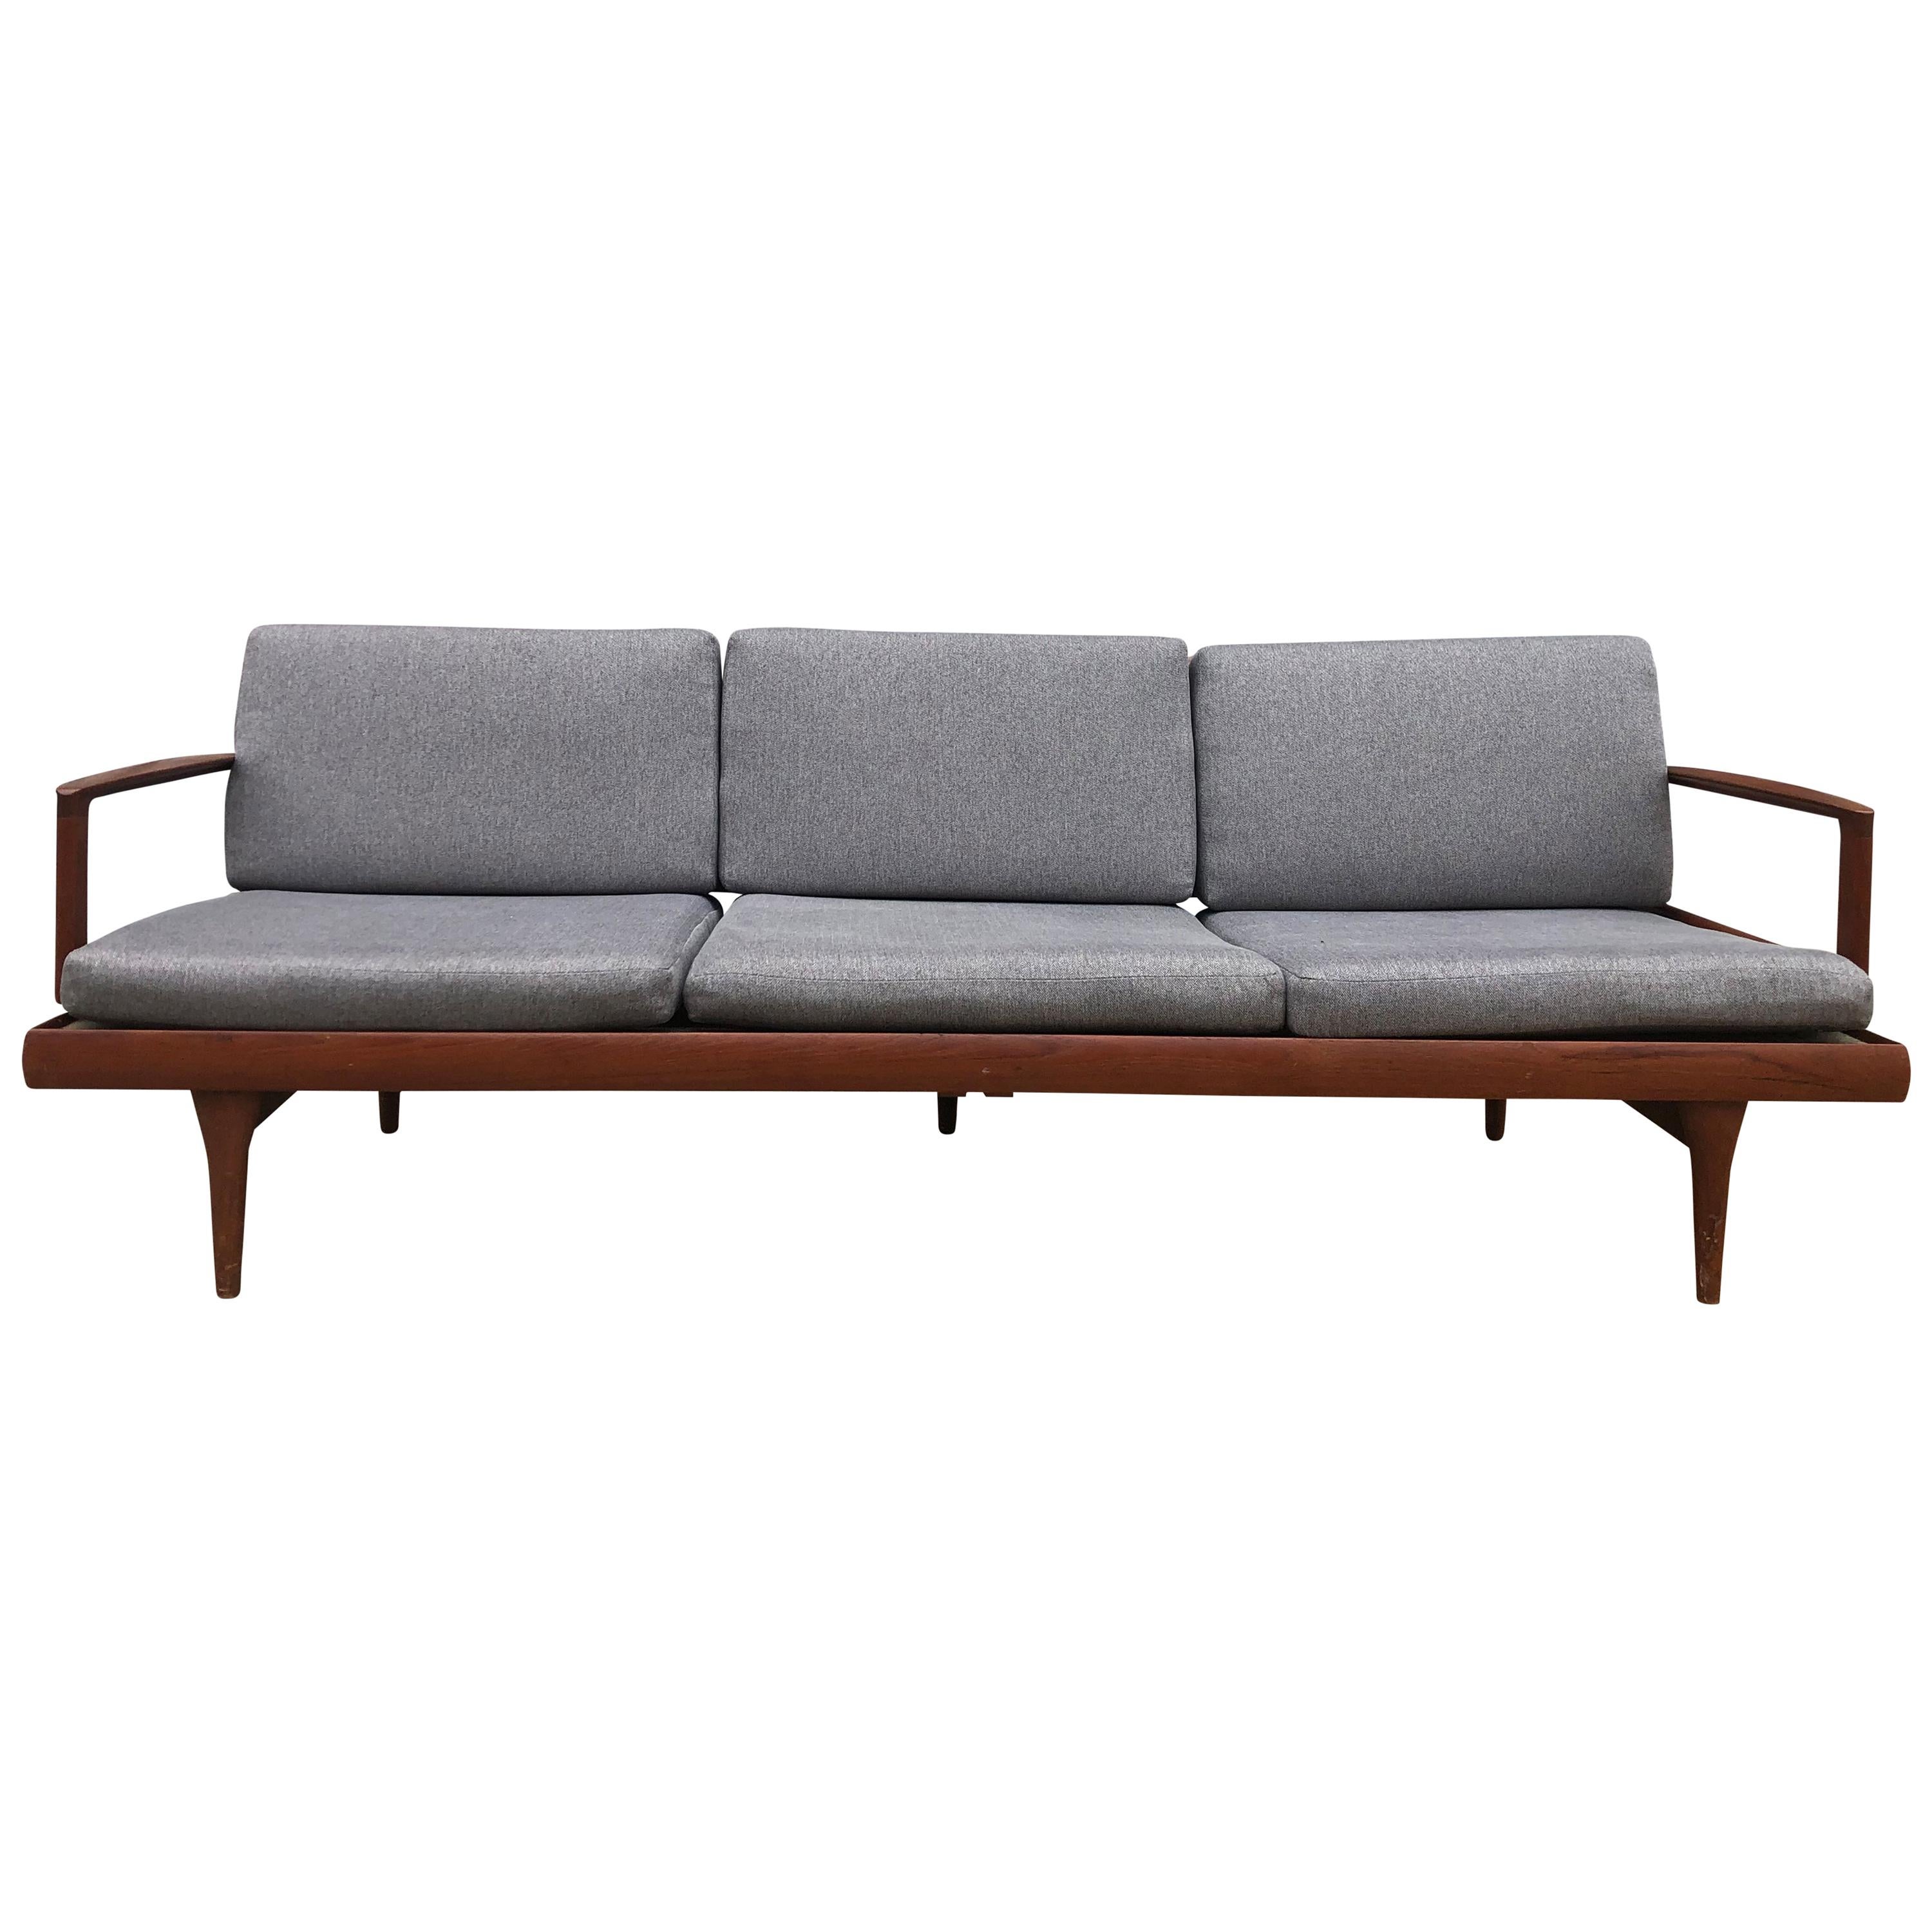 Midcentury Low Danish Modern 3-Seat Sofa Couch Daybed Solid Teak Grey Fabric